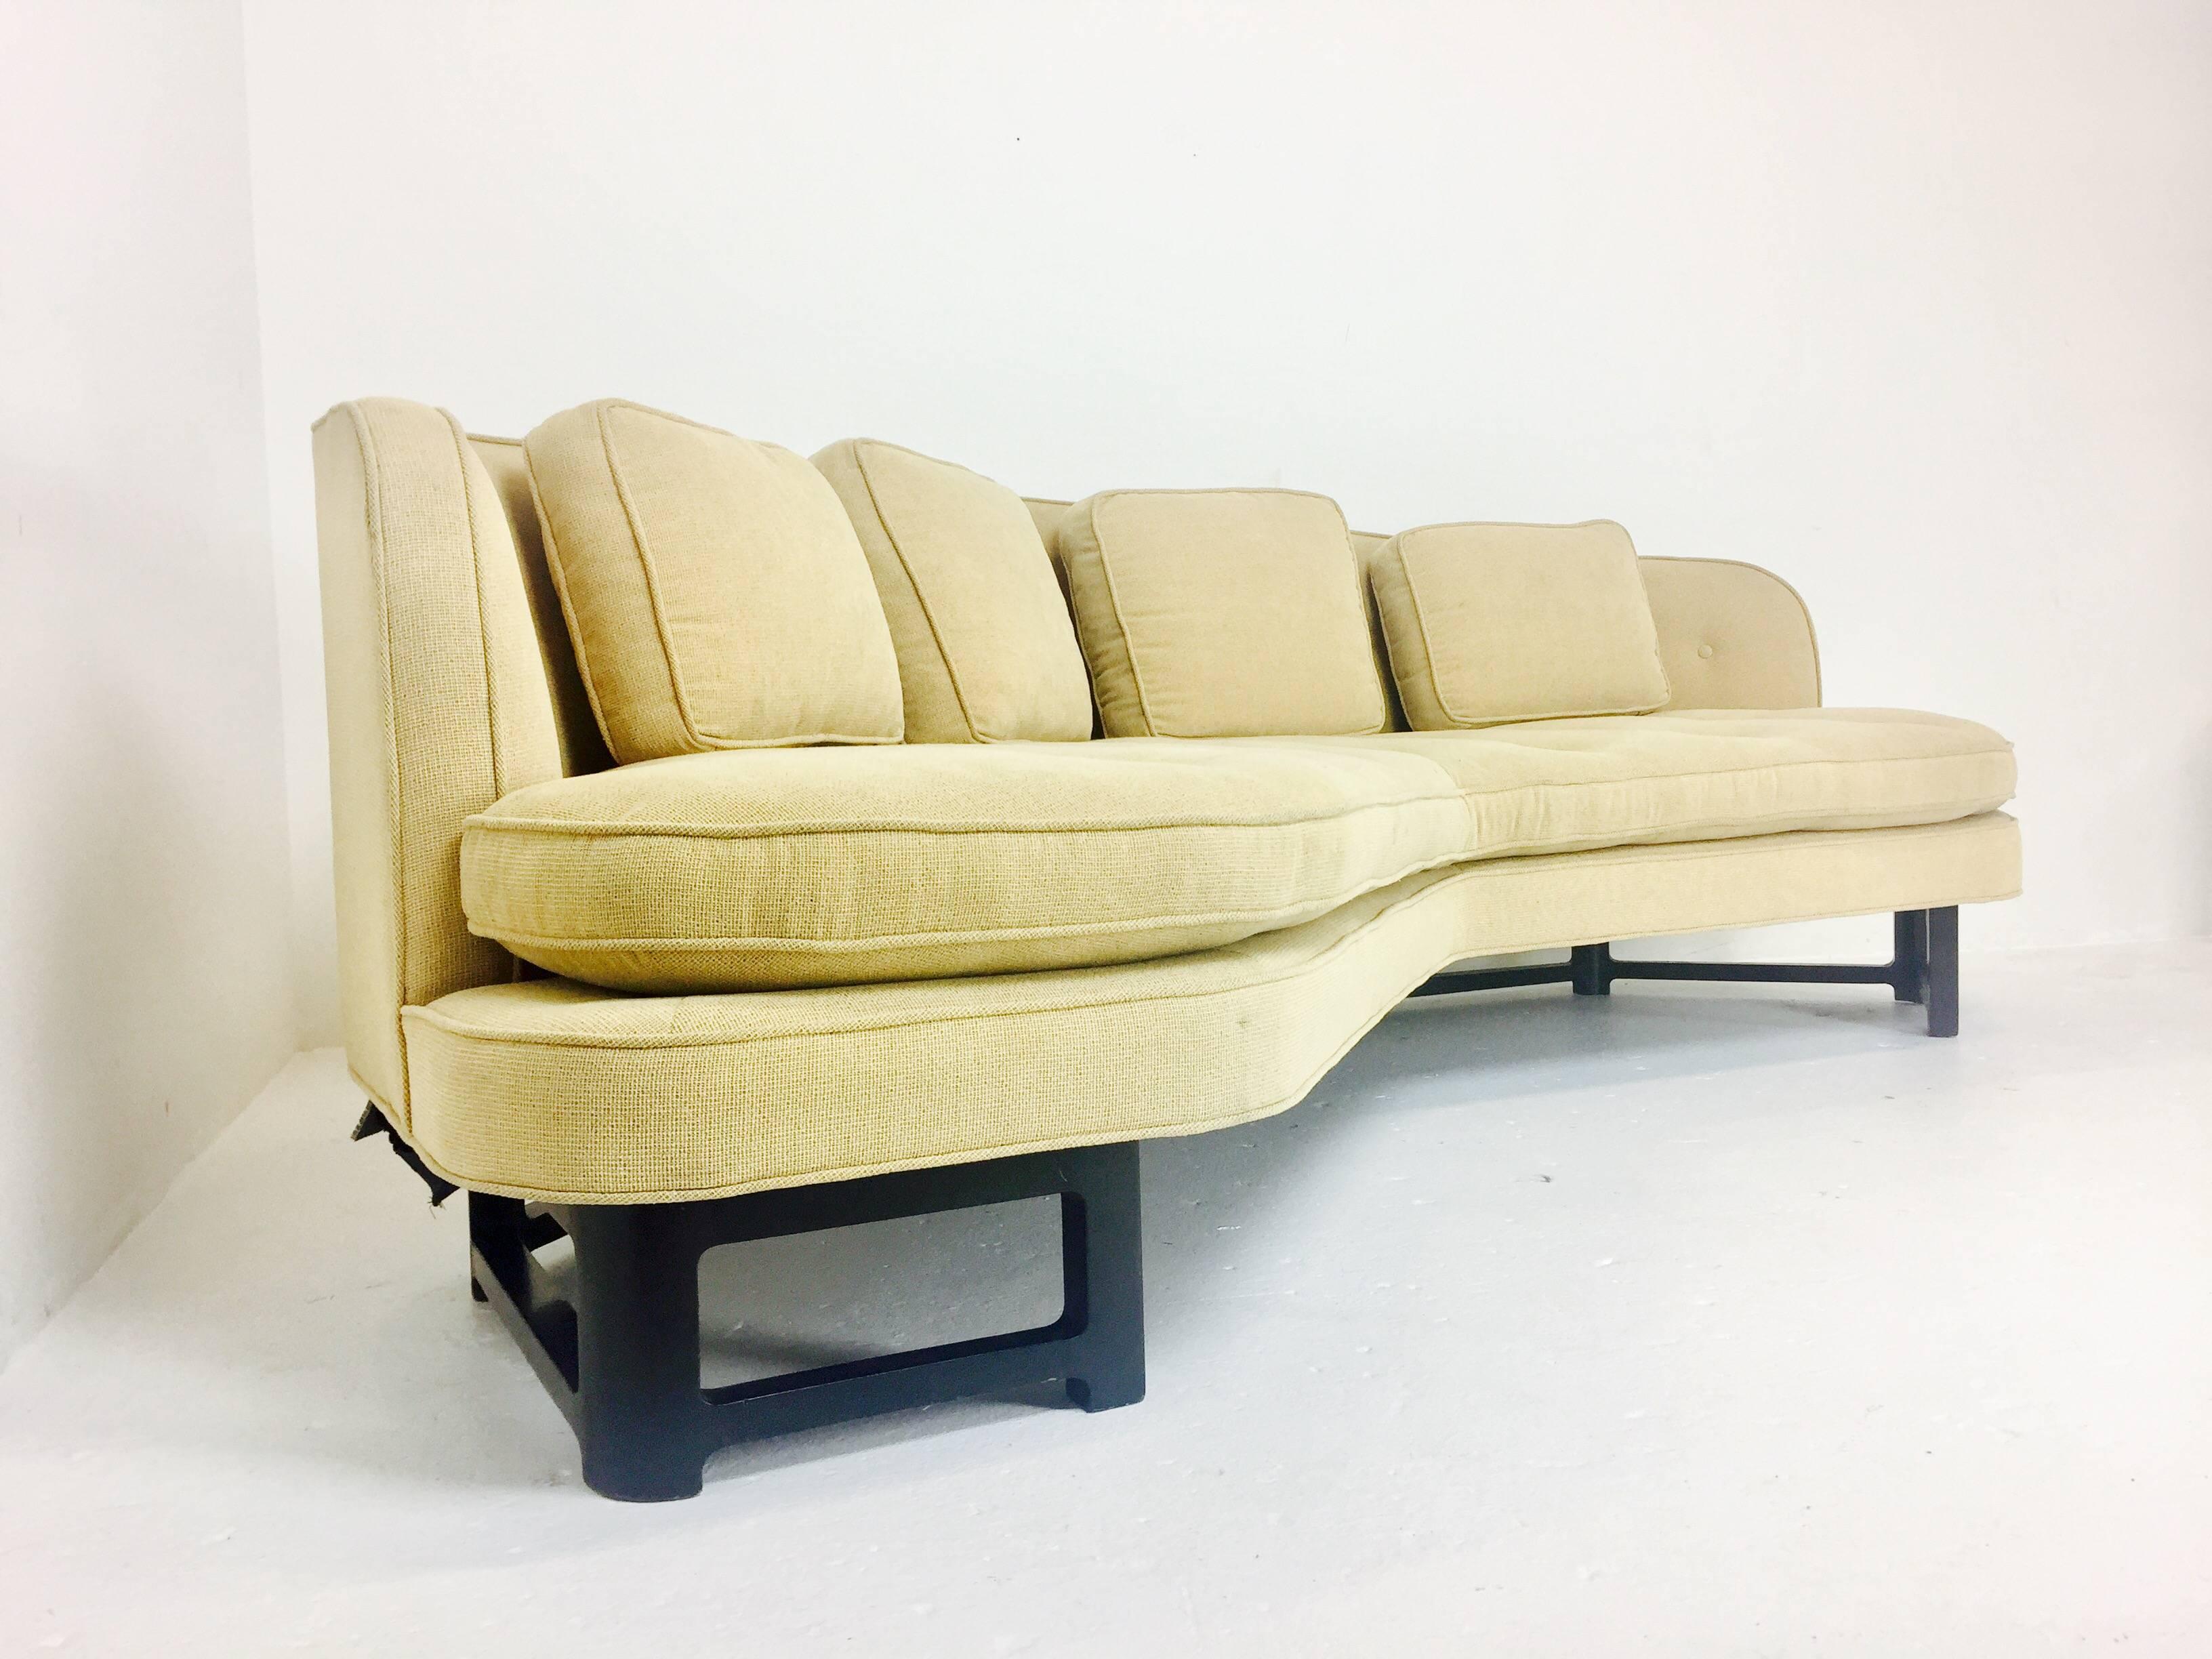 Monumental angular "Janus" sofa by Edward Wormley for Dunbar. Sofa has a sturdy frame and retains original upholstery.

Dimensions: 102" W x 33" D x 28" T.
Seat height 17".